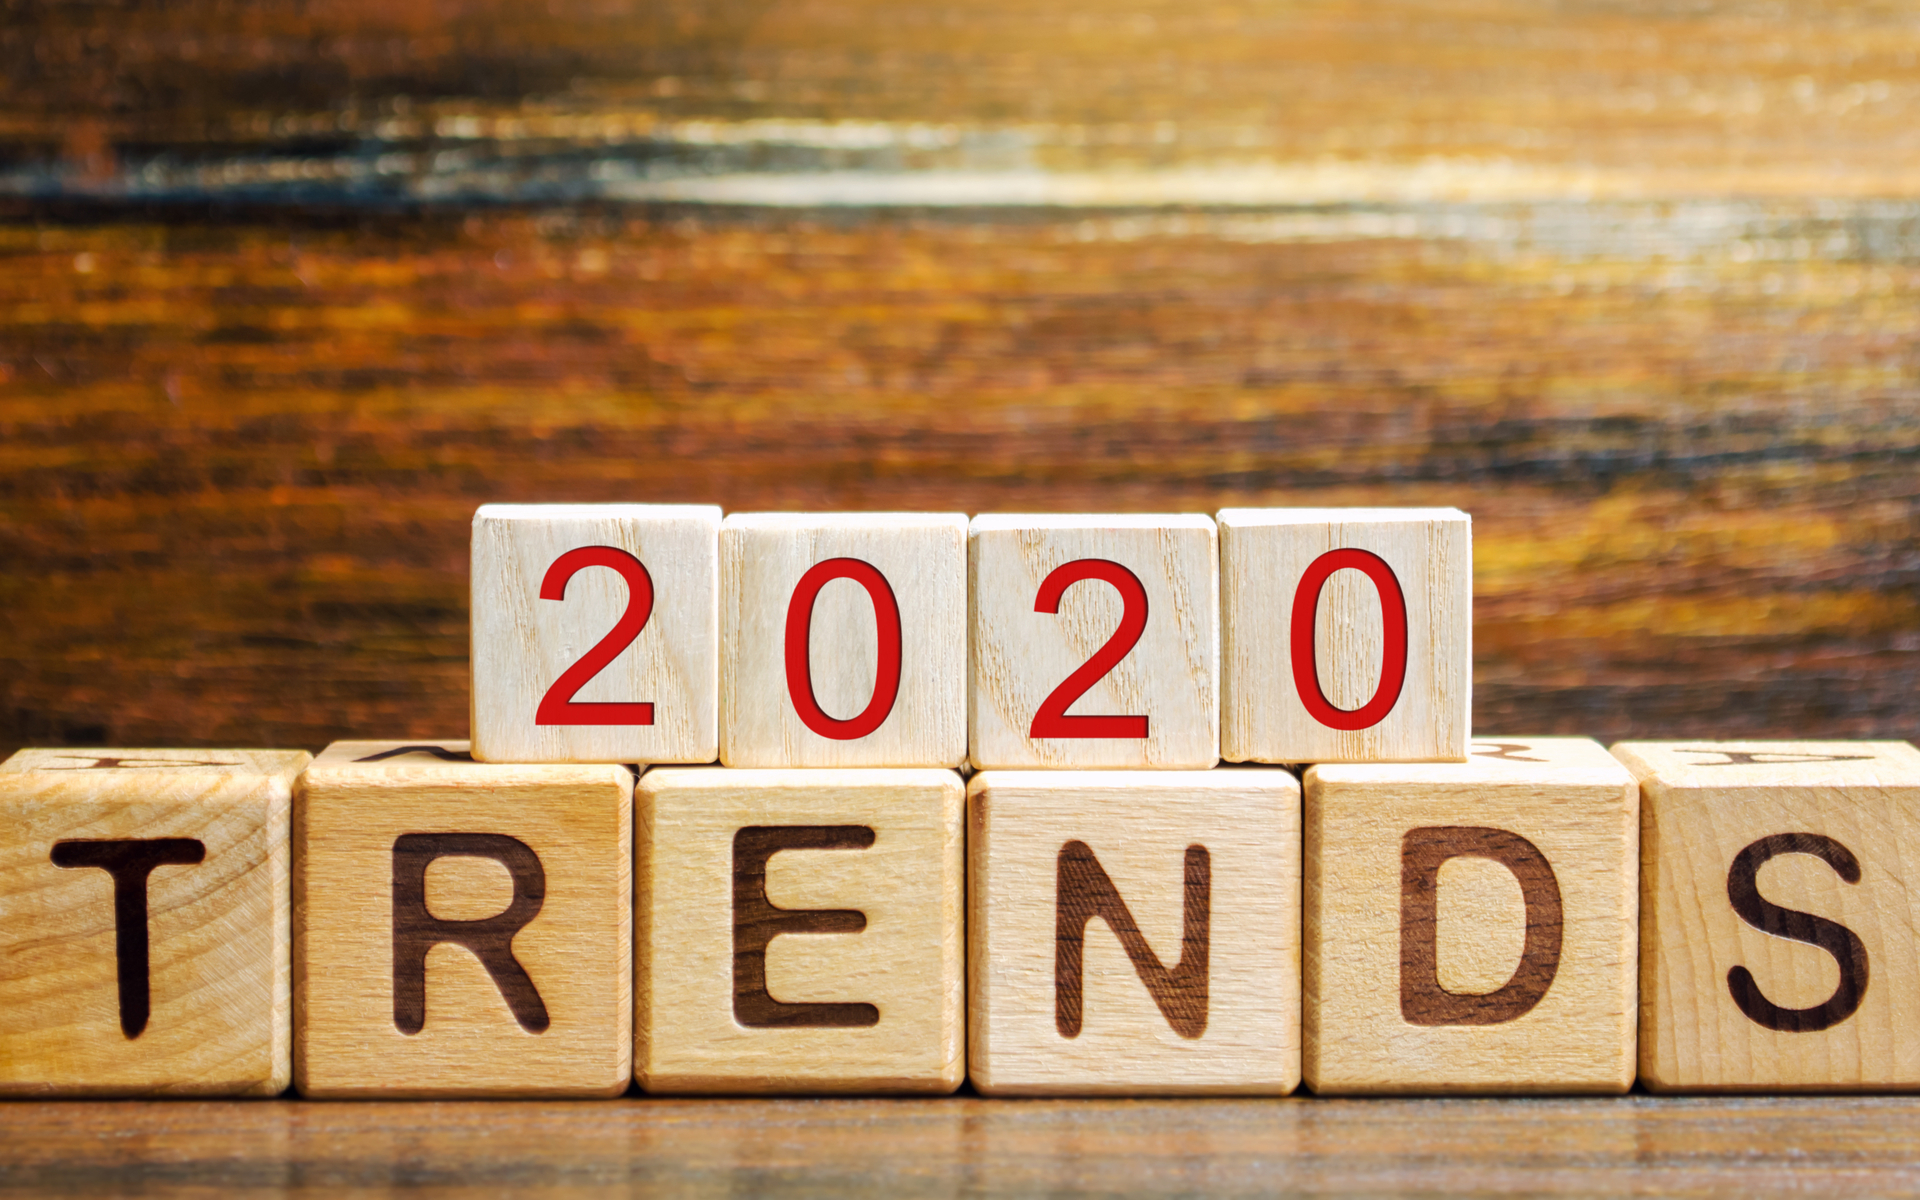 crypto hot trends 2020, messari research